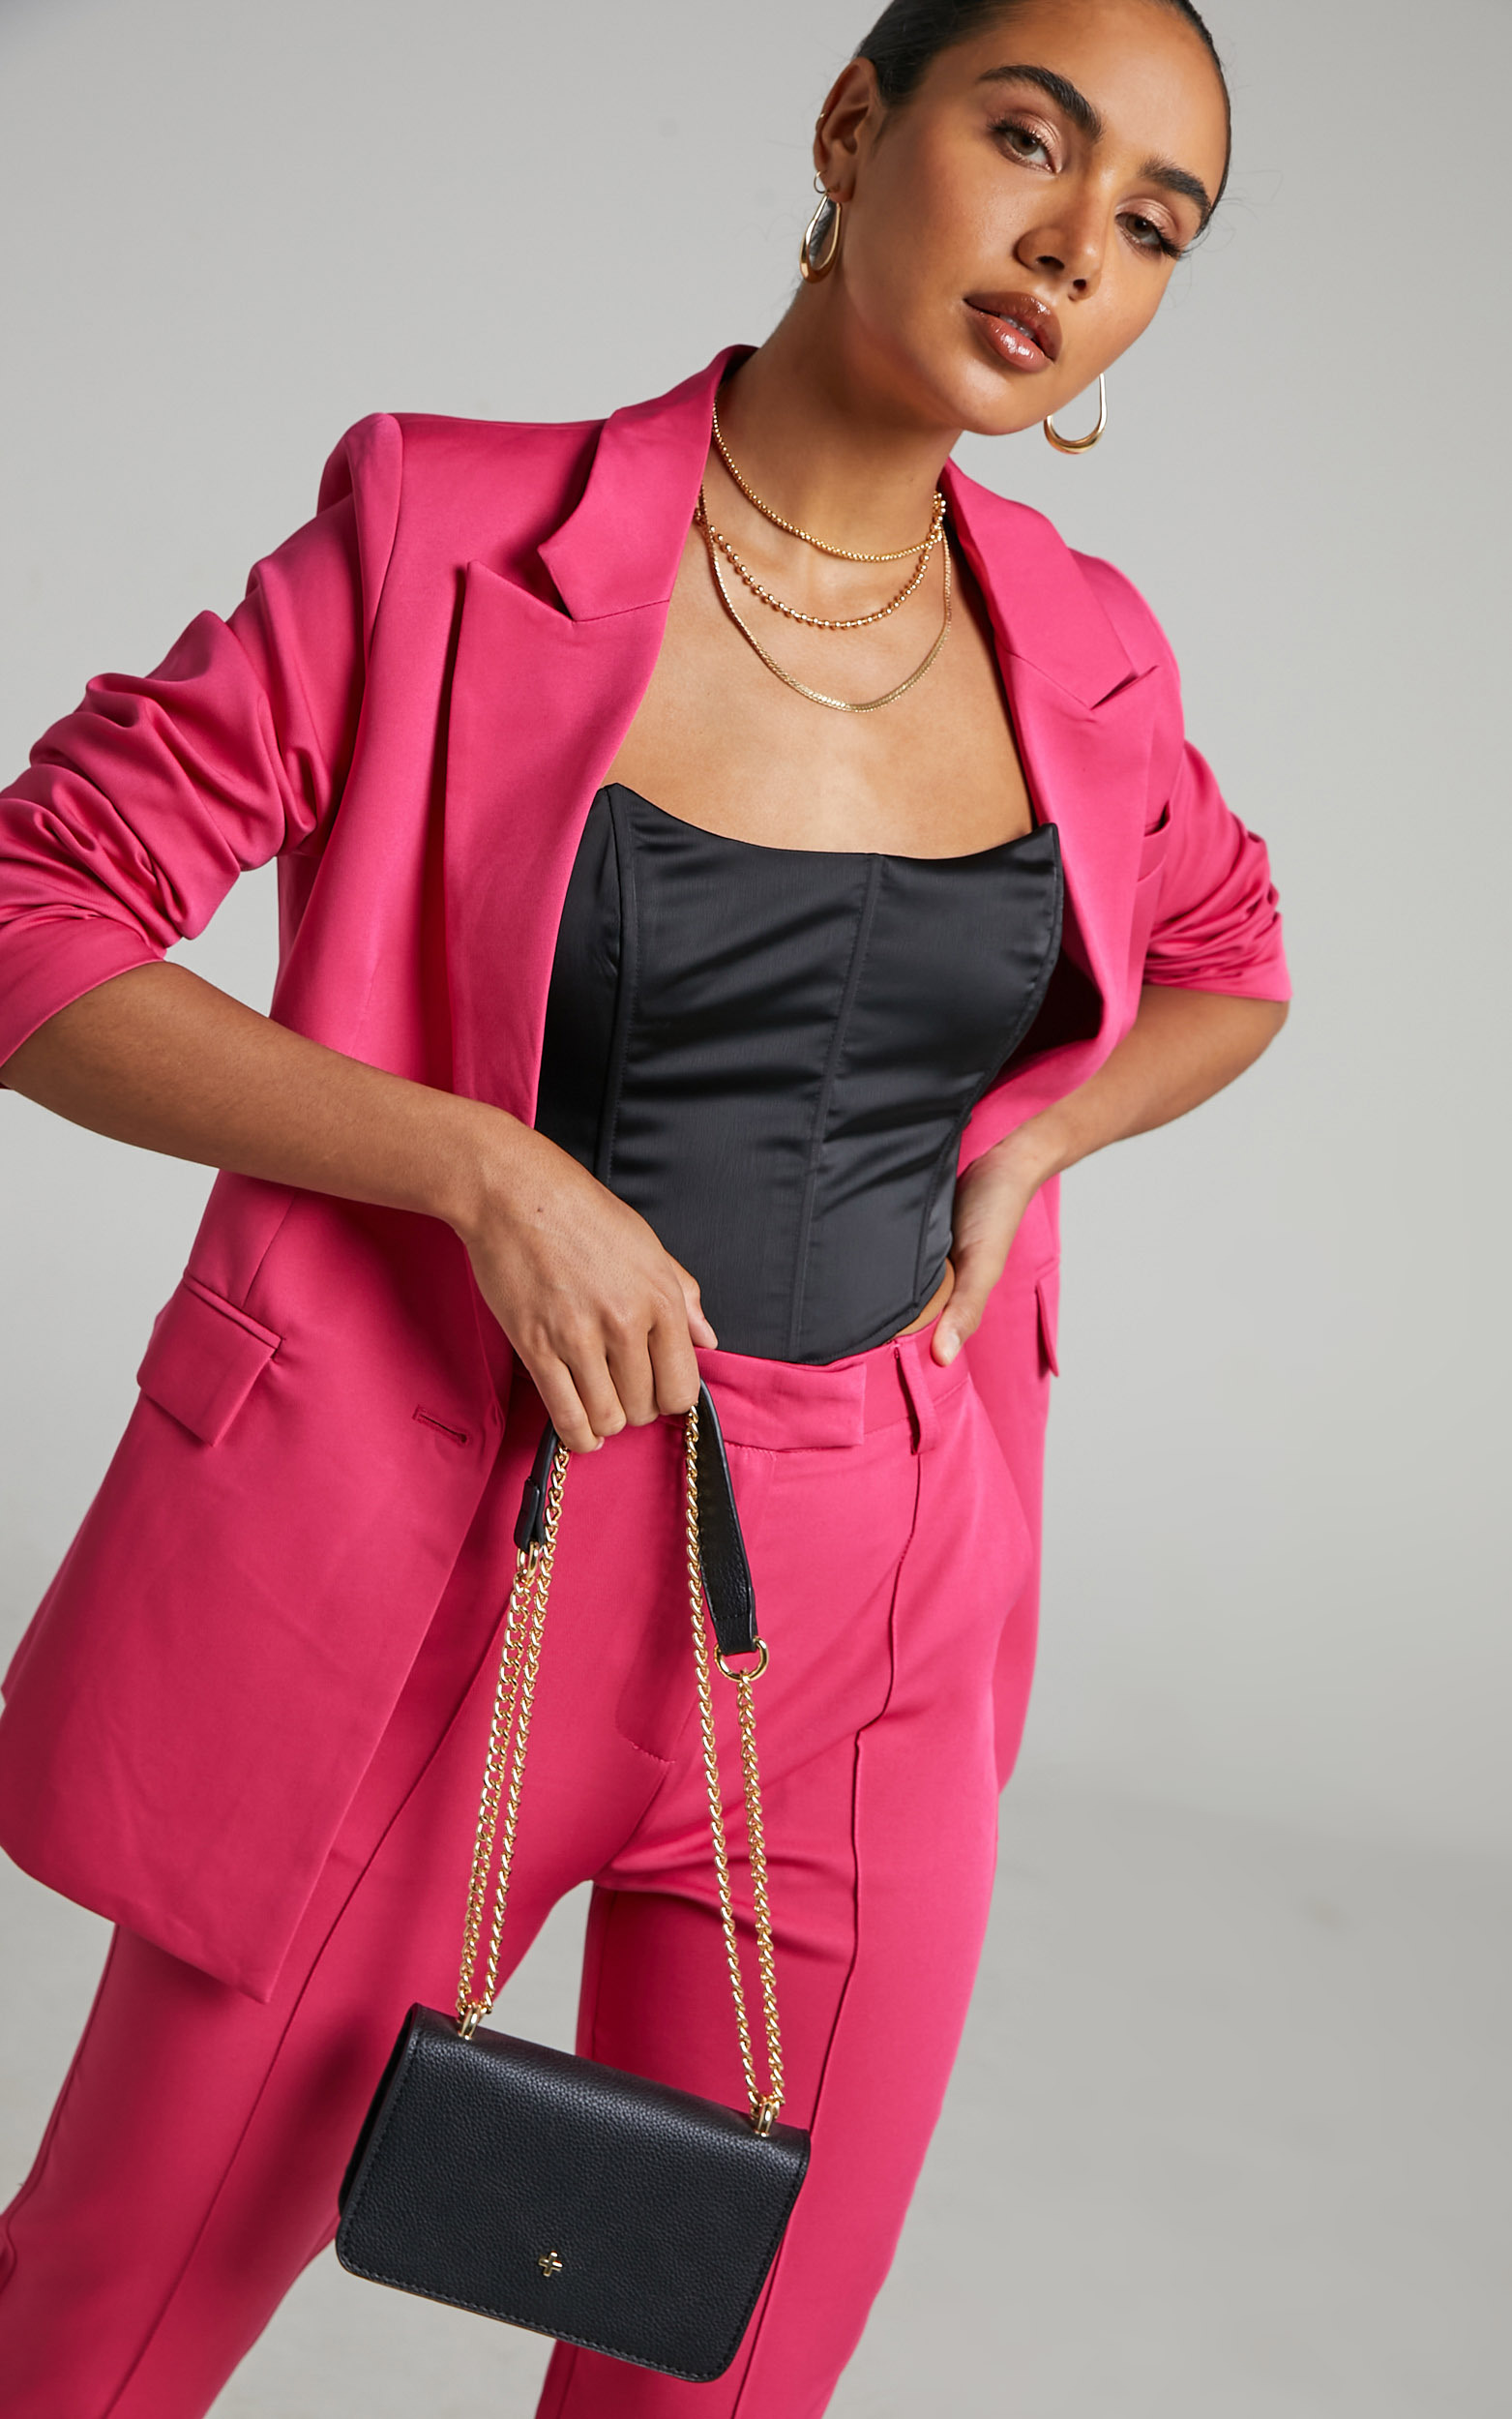 RUNAWAY THE LABEL - AMITY BLAZER in Fuchsia - L, PNK1, hi-res image number null